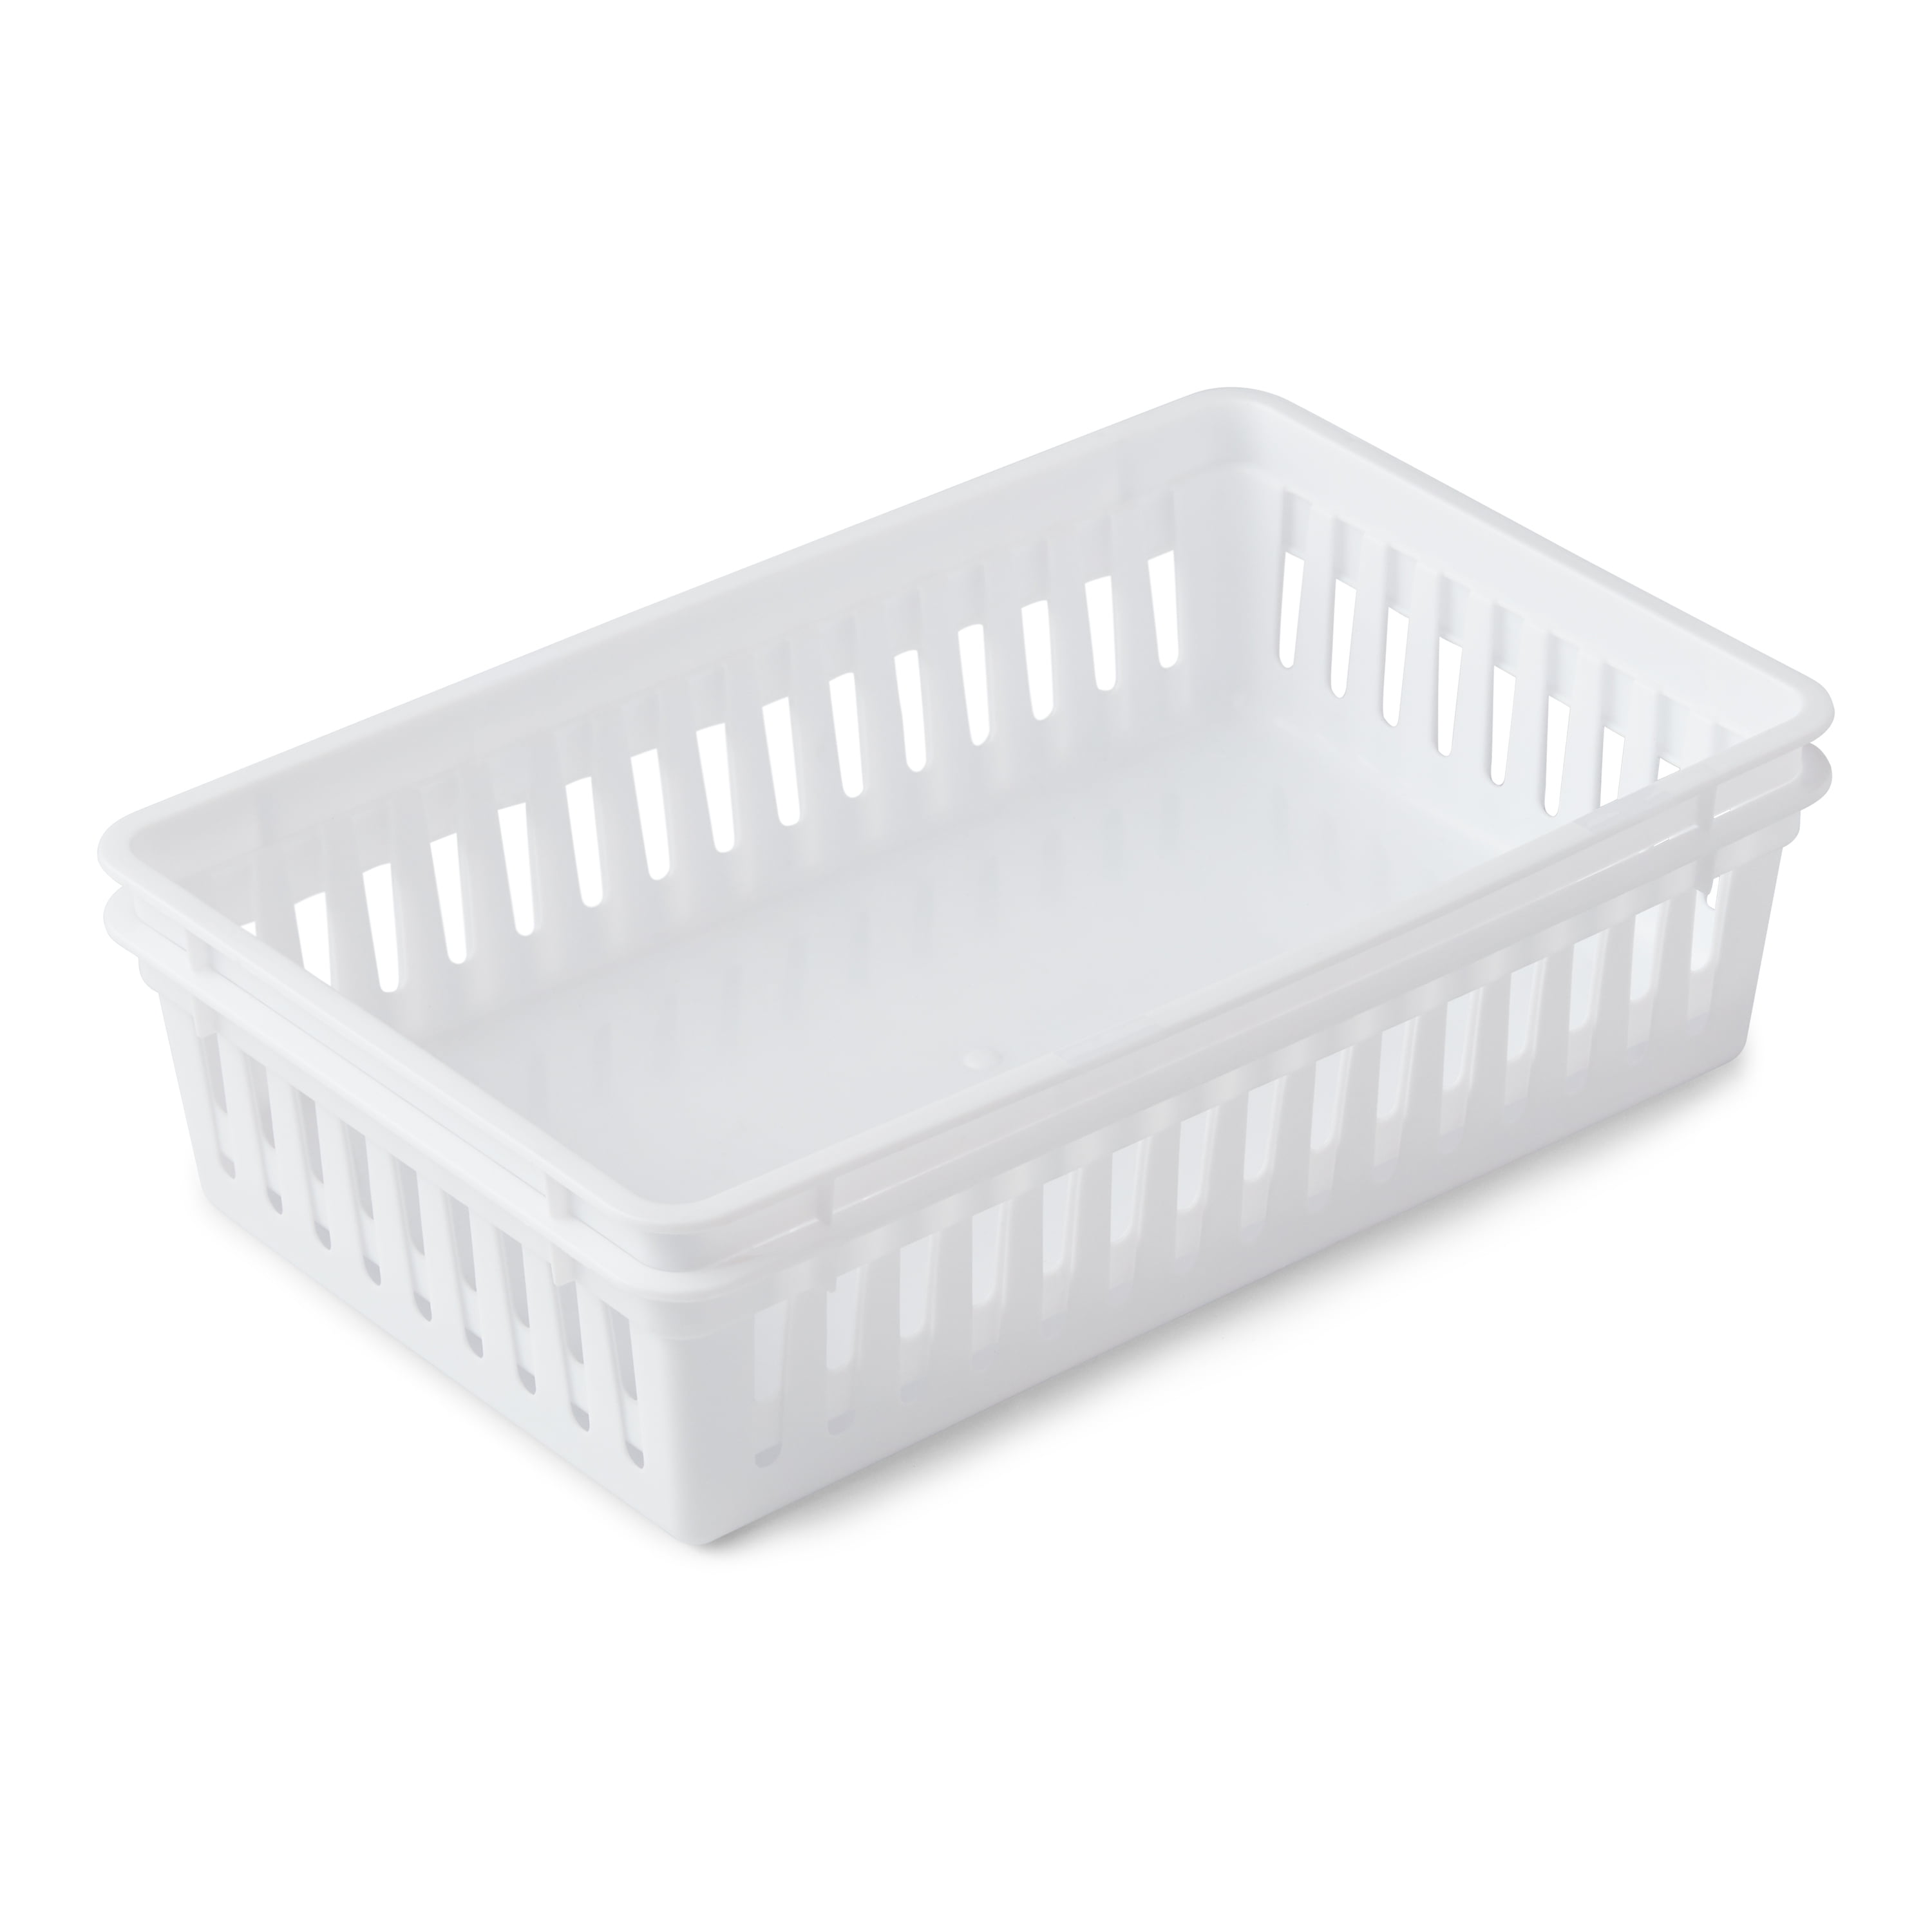 Yesland 6 Pack Plastic Storage Basket, Black Basket Organizer Bin with  Handles for Home Office Closet, 6 x 12 x 5 Inches